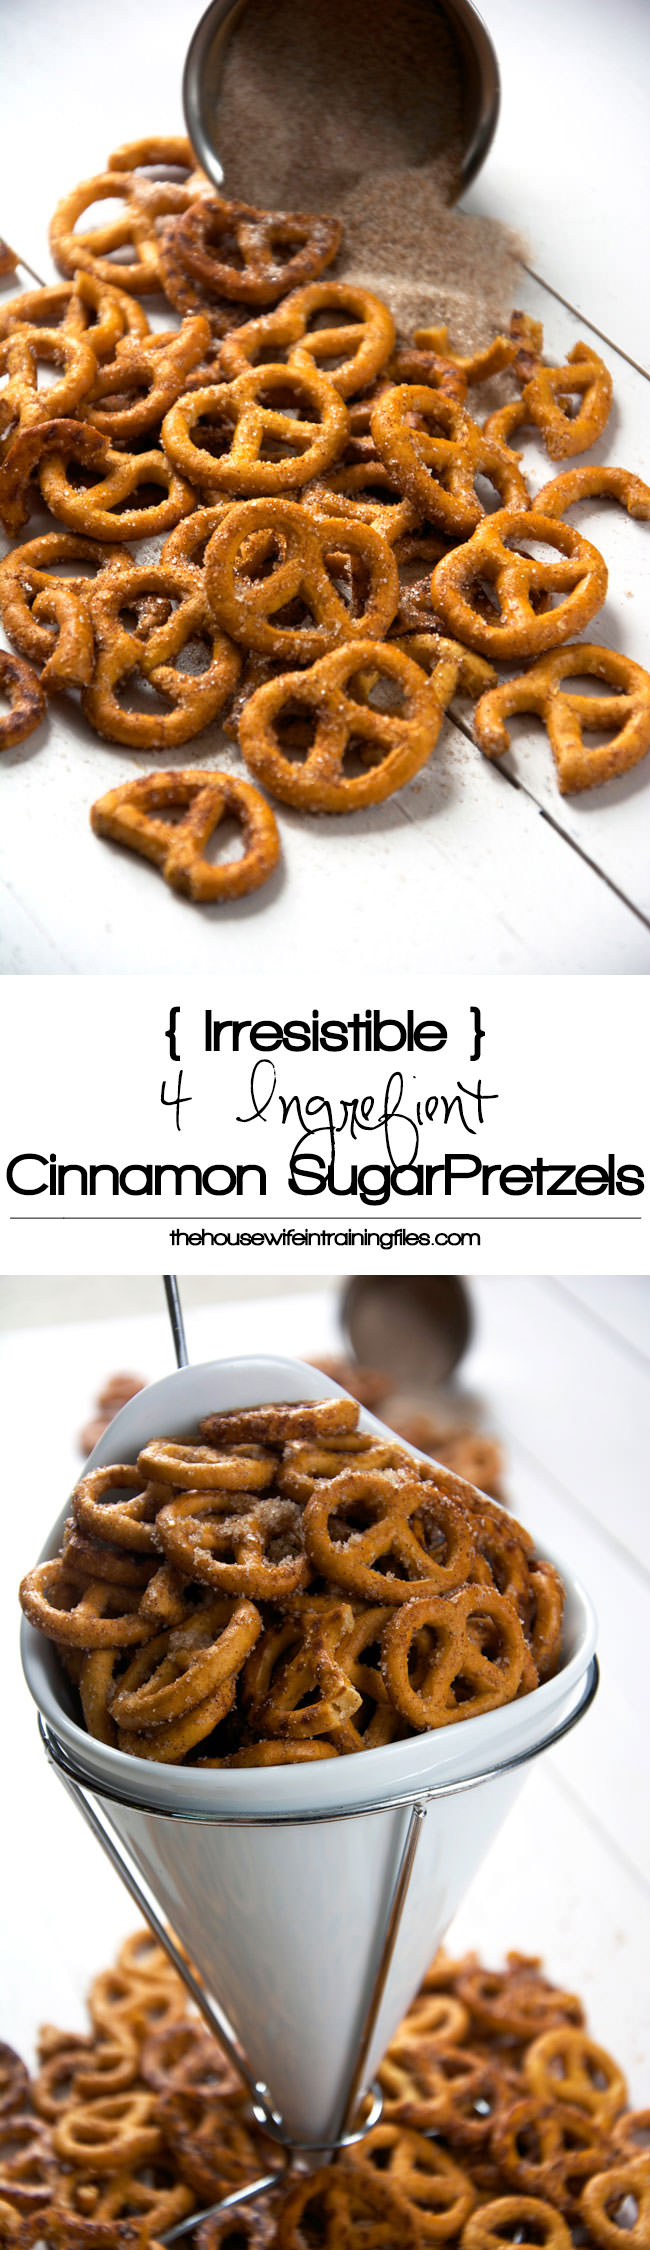 Sweet, salty, crunchy and so irresistible! Cinnamon Sugar Pretzels are simple to make with only 4 ingredients. They will be your favorite dessert, appetizer or snack in no time! #glutenfree #coconutoil #healthy #snack